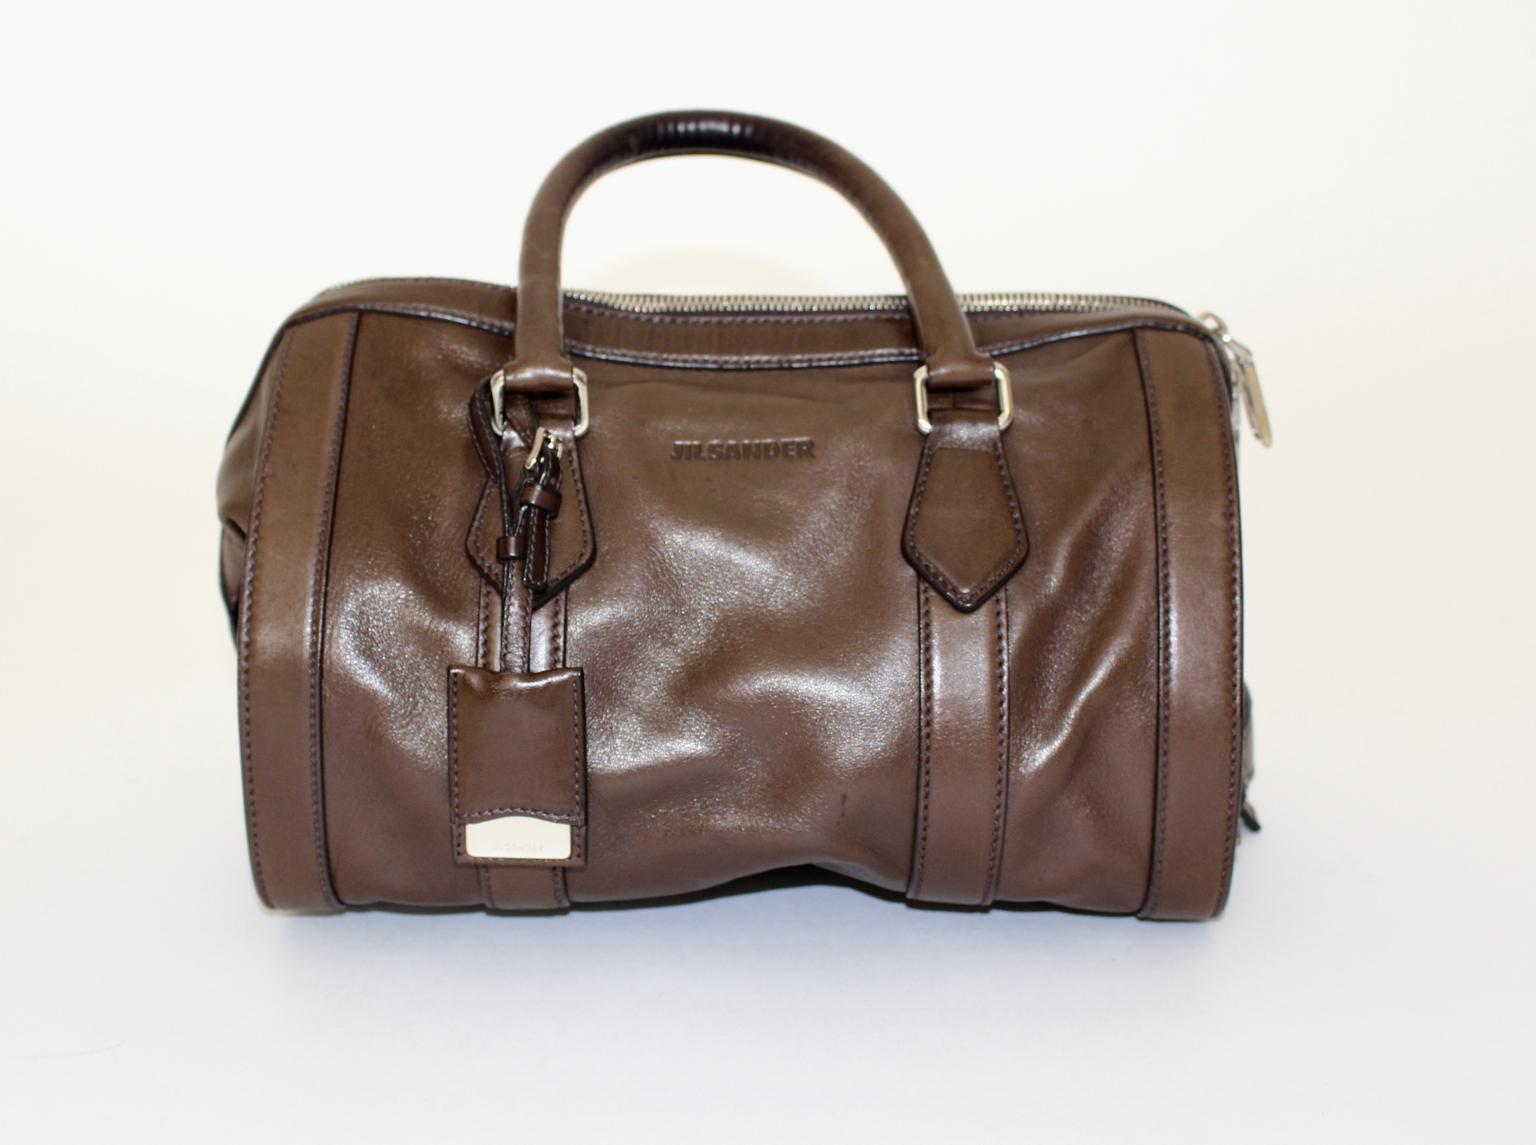 This handle handbag by Jil Sander was made of brown nappa leather.
One zip closure on the top and two side pockets inside the handbag.
Excellent vintage condition

approx. measures:
Length: 29 cm
Width: 23 cm
Height: 20 cm